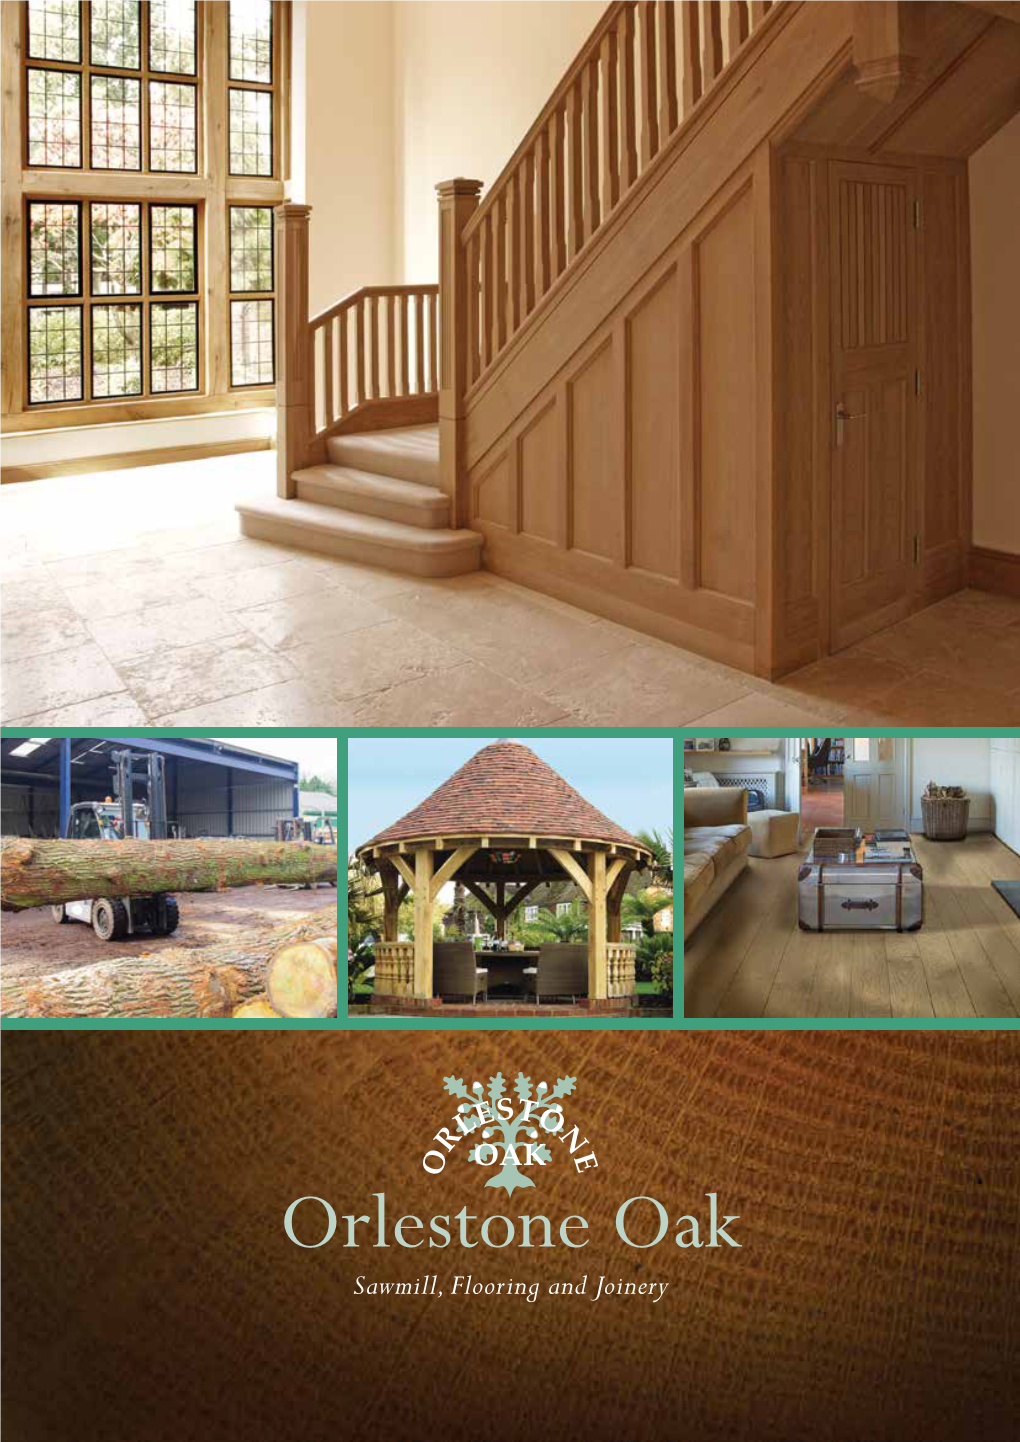 Sawmill, Flooring and Joinery Welcome to Orlestone Oak